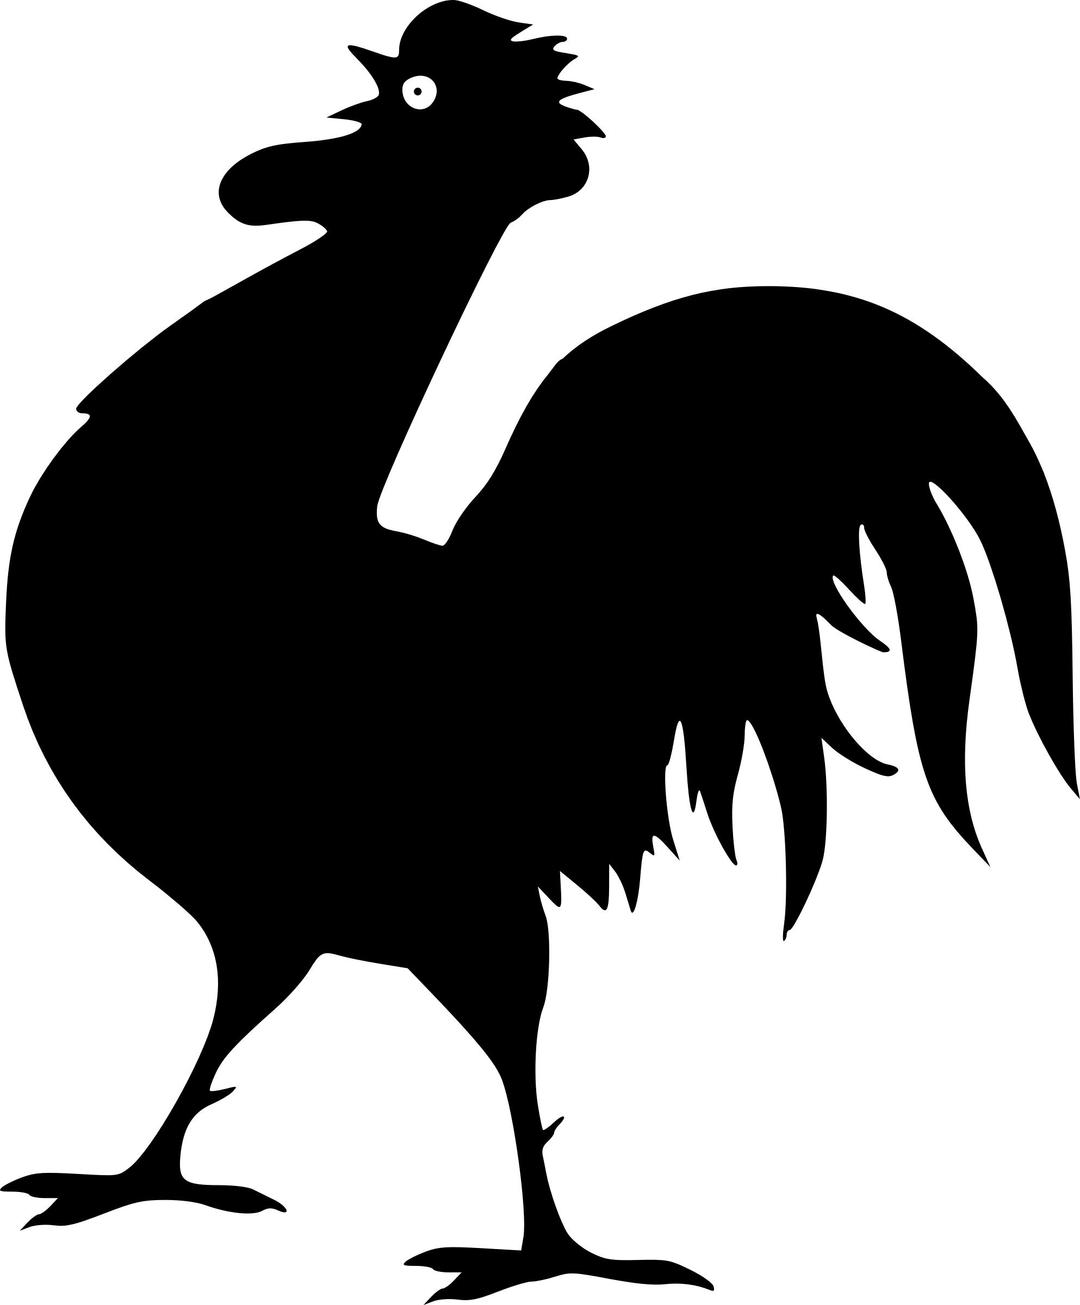 Chicken silhouette png transparent